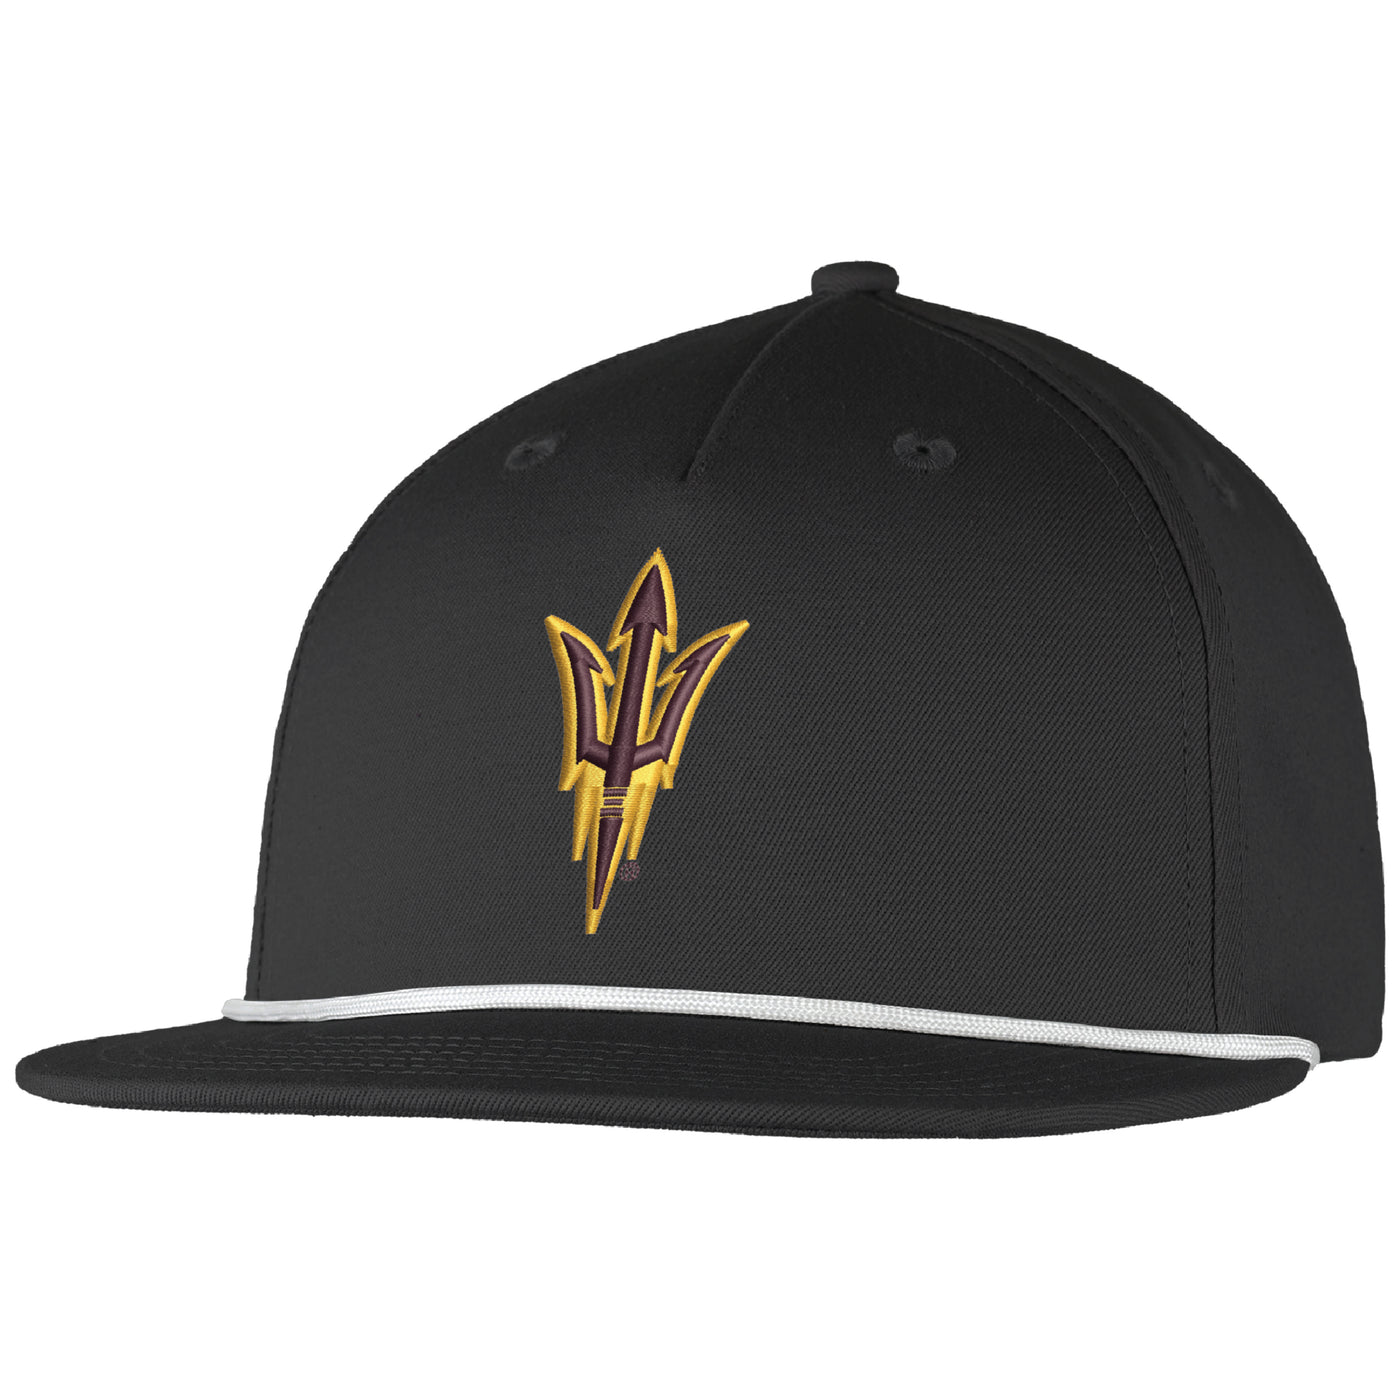 ASU black snapback hat with a pitchfork in maroon outlined in gold and a thin white rope across where the bill meets the hat